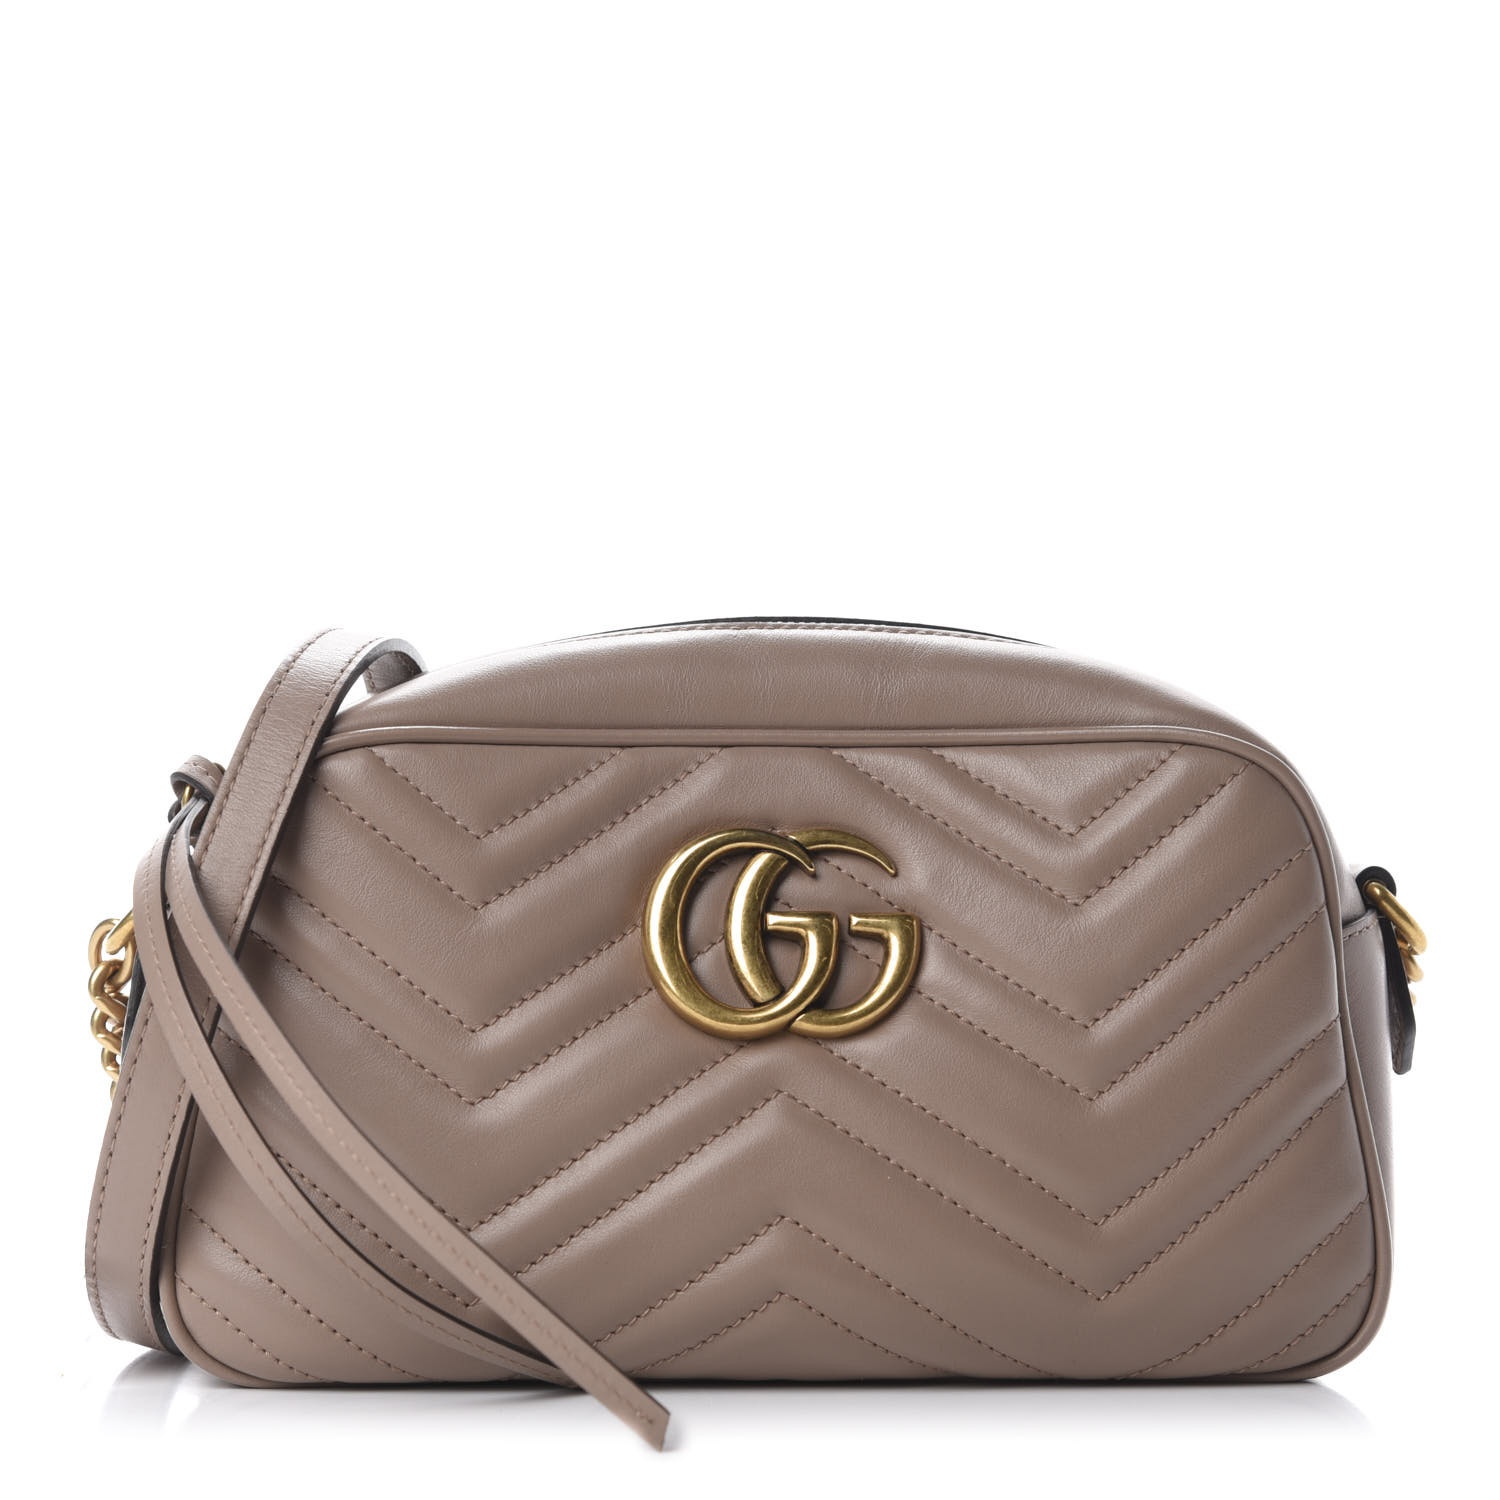 gucci marmont small porcelain rose